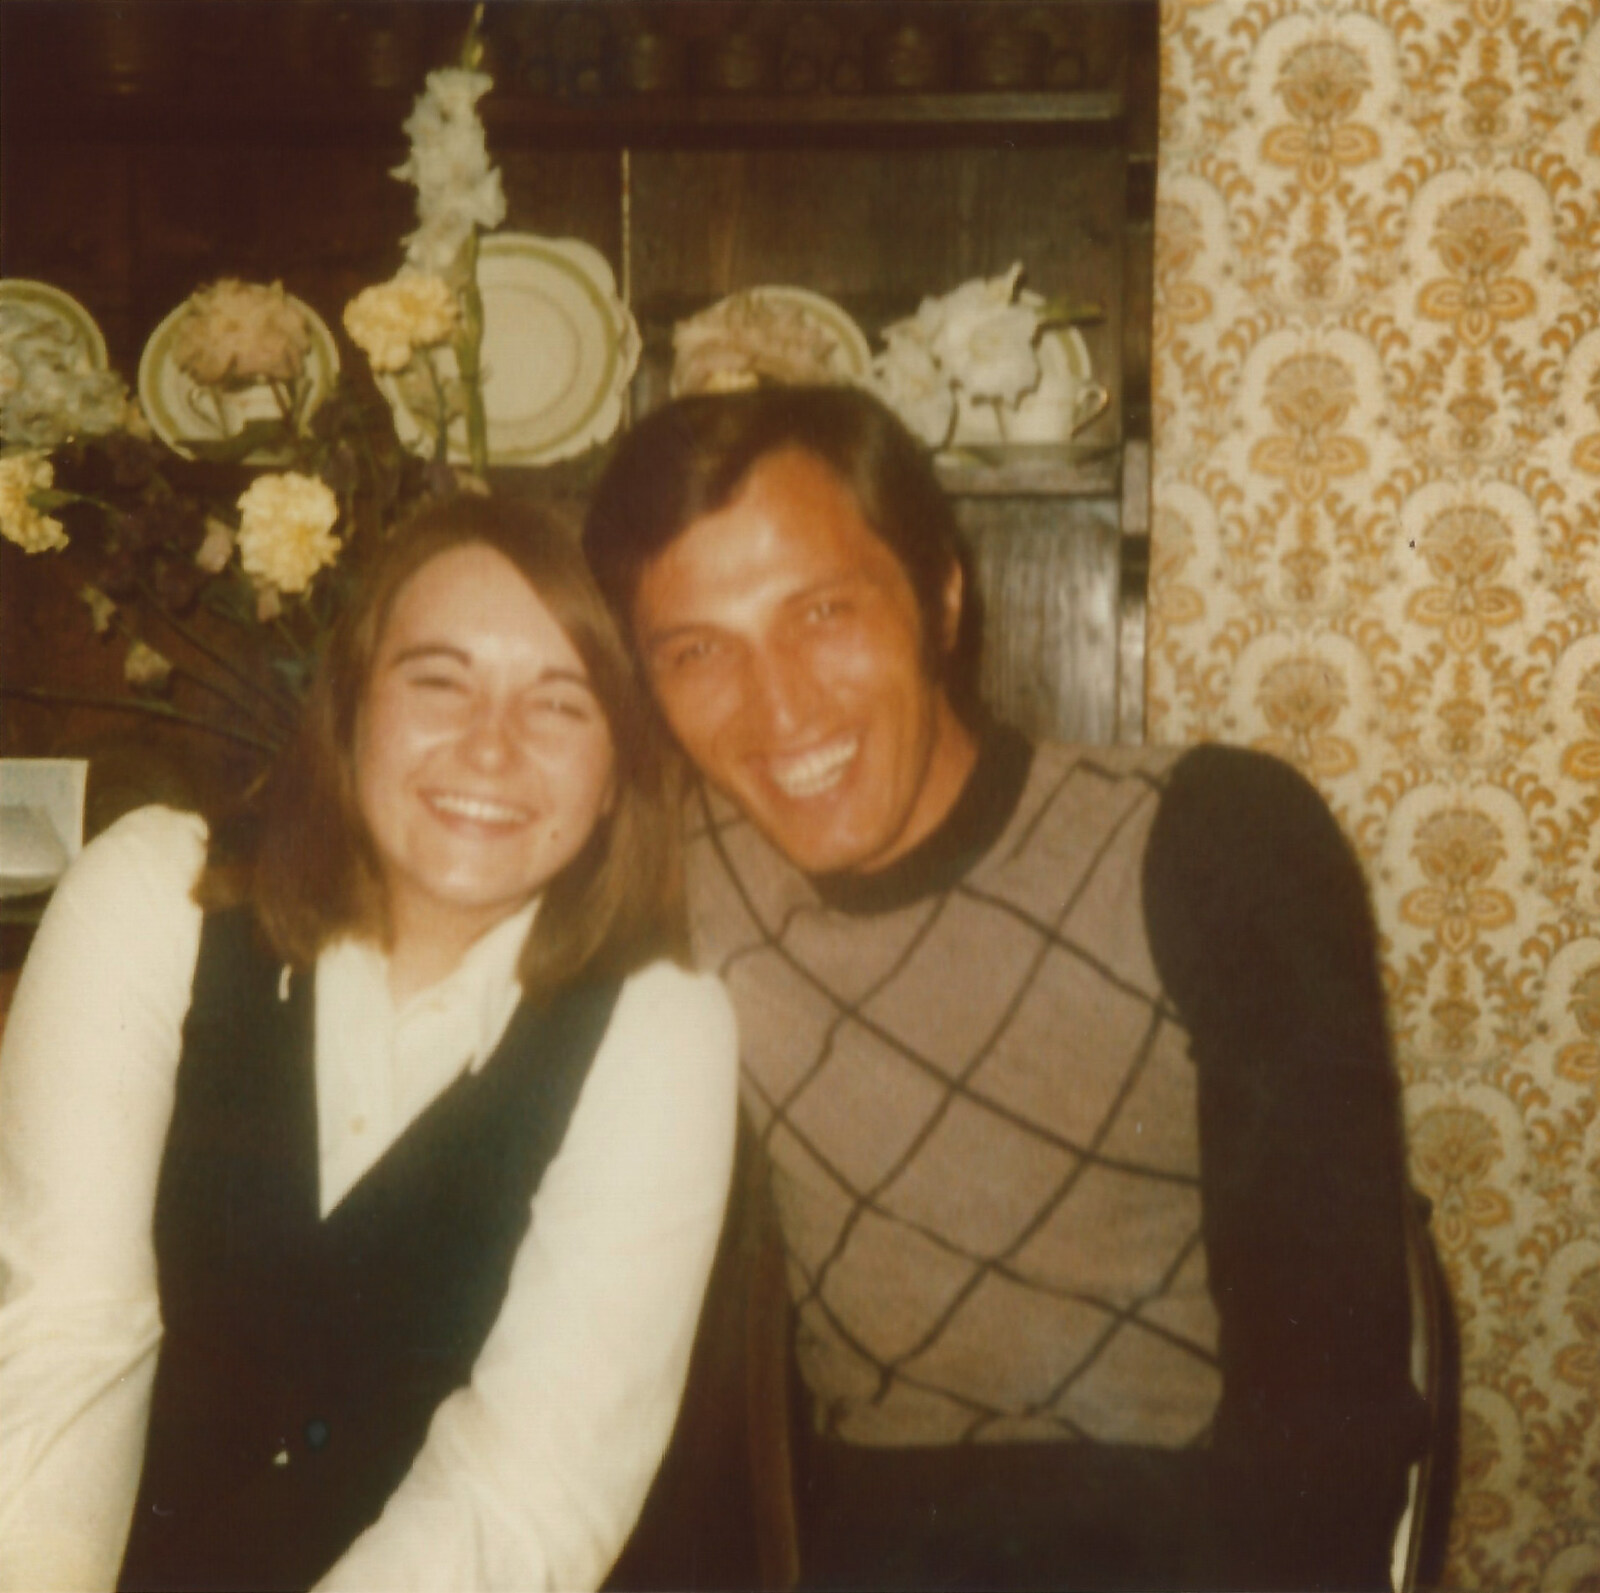 Caroline and Bruno from Family History: The 1970s, Timperley and Sandbach, Cheshire - 24th January 2020